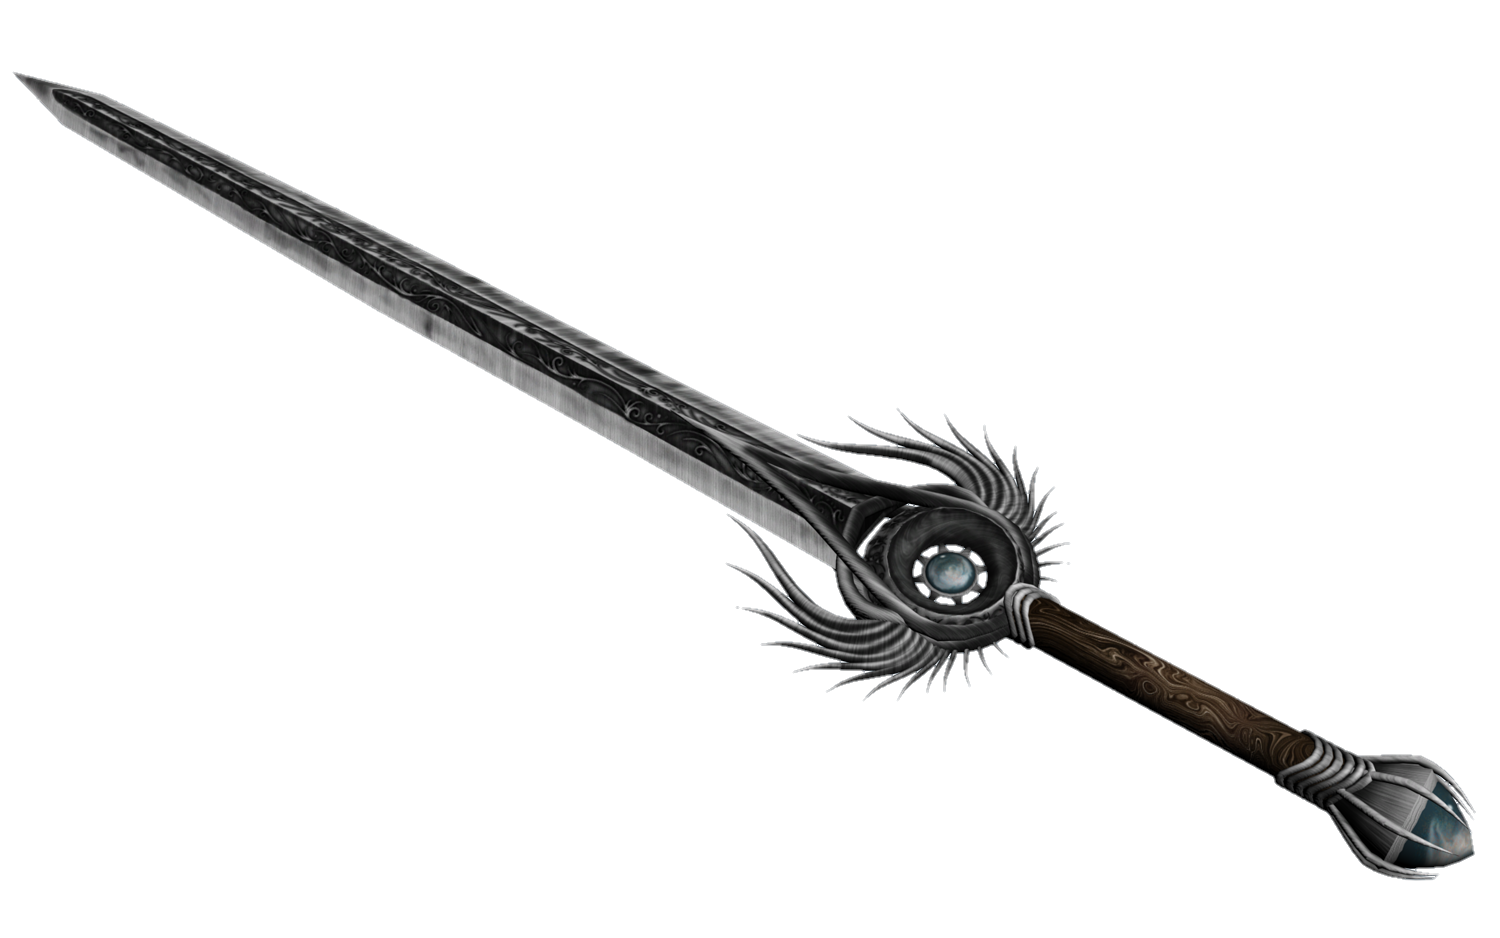 sword-png-from-pngfre-2